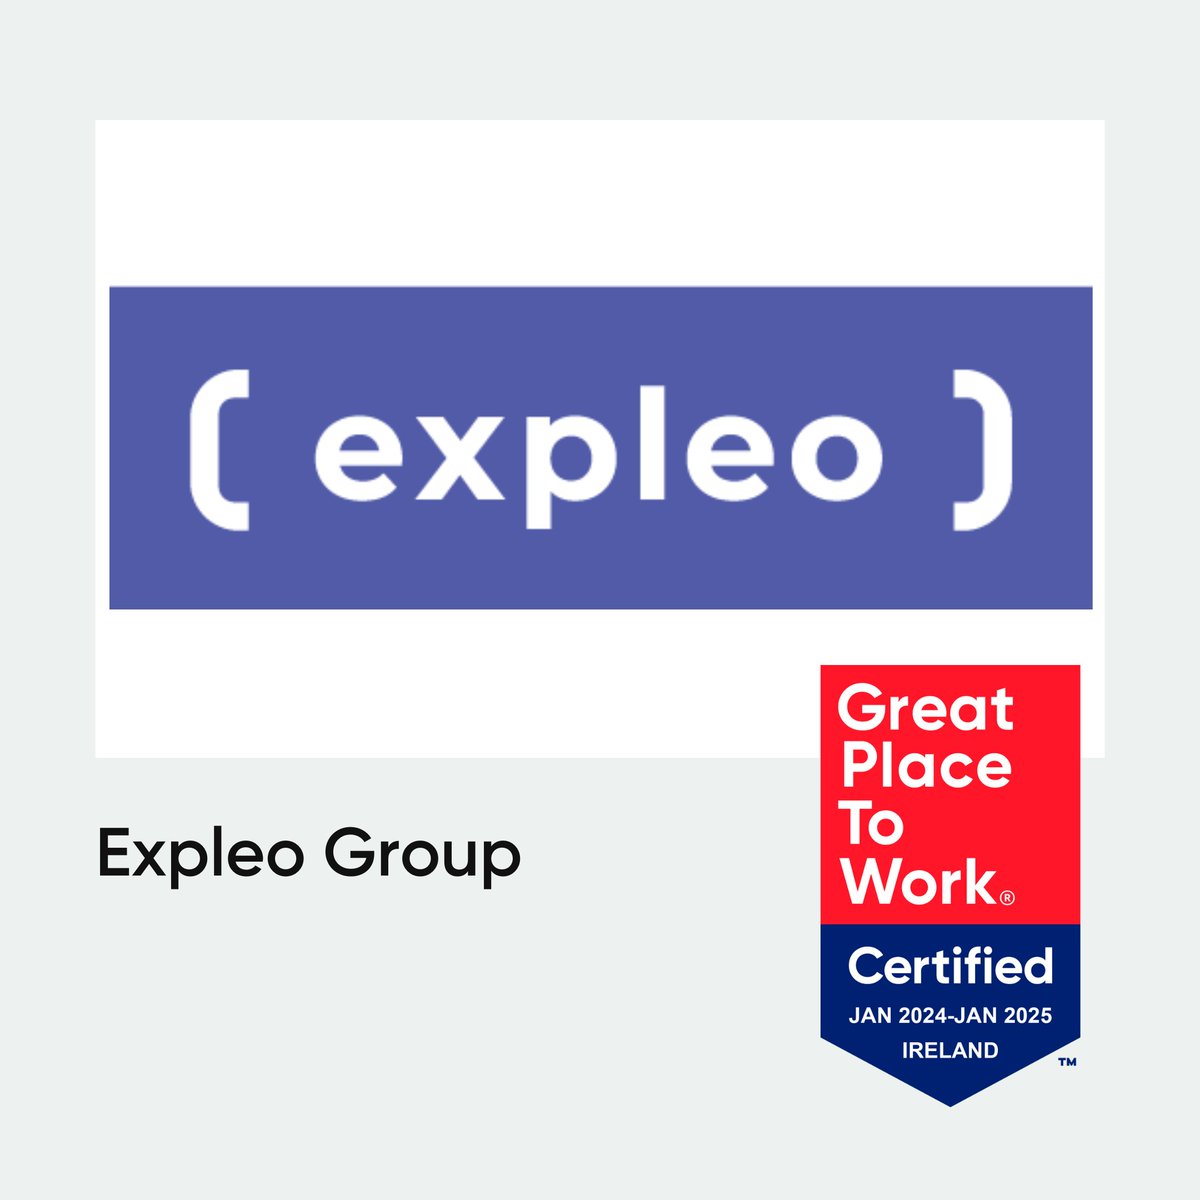 Expleo has been officially certified as a @GPTW_Ireland for the 10th consecutive year 🏆✨ This achievement is a testament to the incredible dedication and passion of our people who make Expleo such an amazing place to work every single day. 🙌 #GreatPlaceToWork